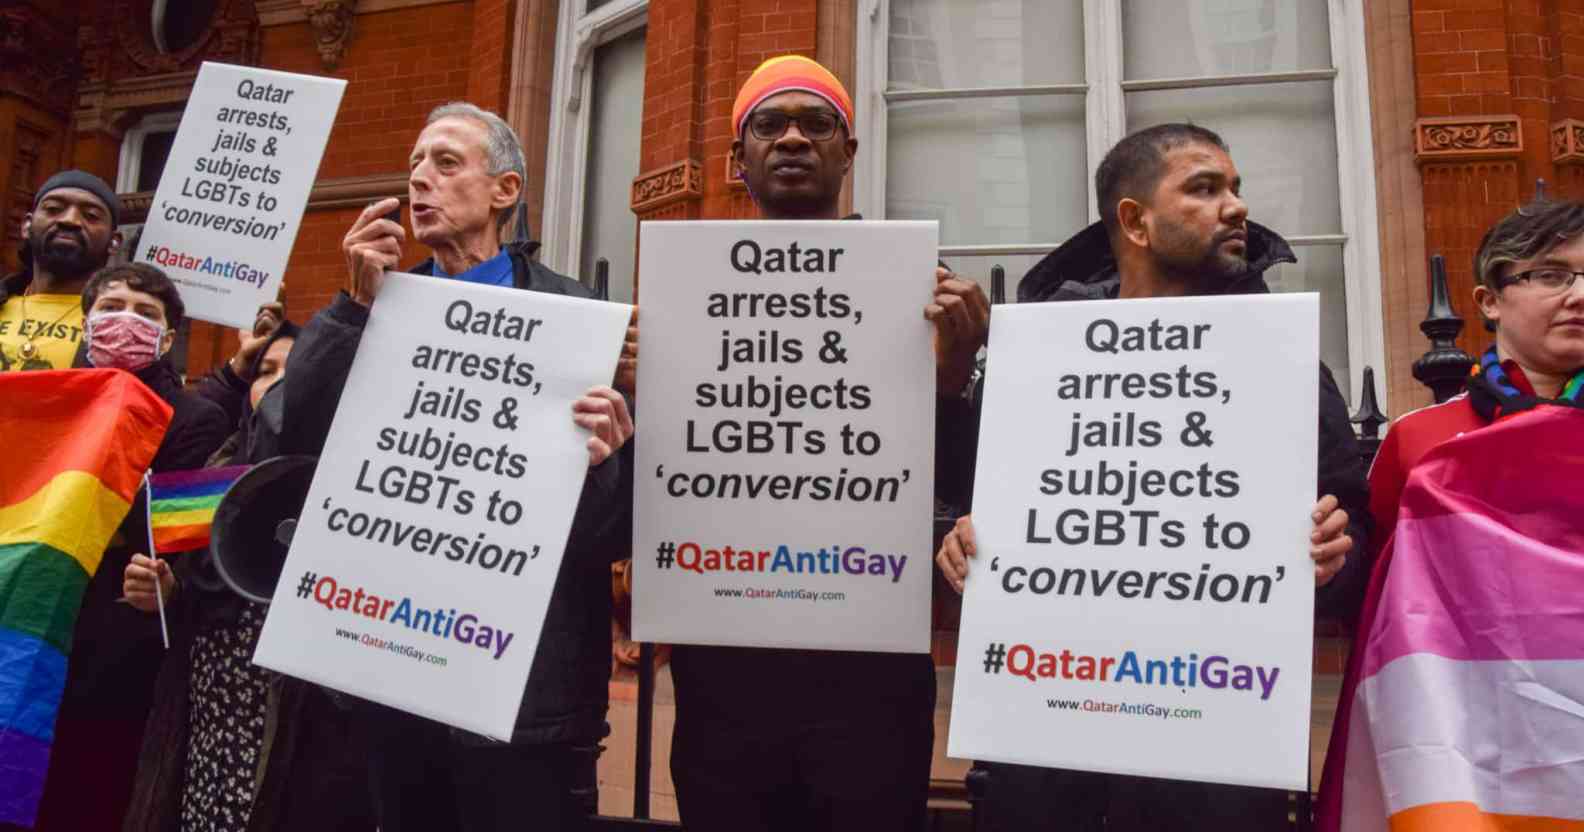 Activists protest outside the Embassy of Qatar in London on the eve of the World Cup